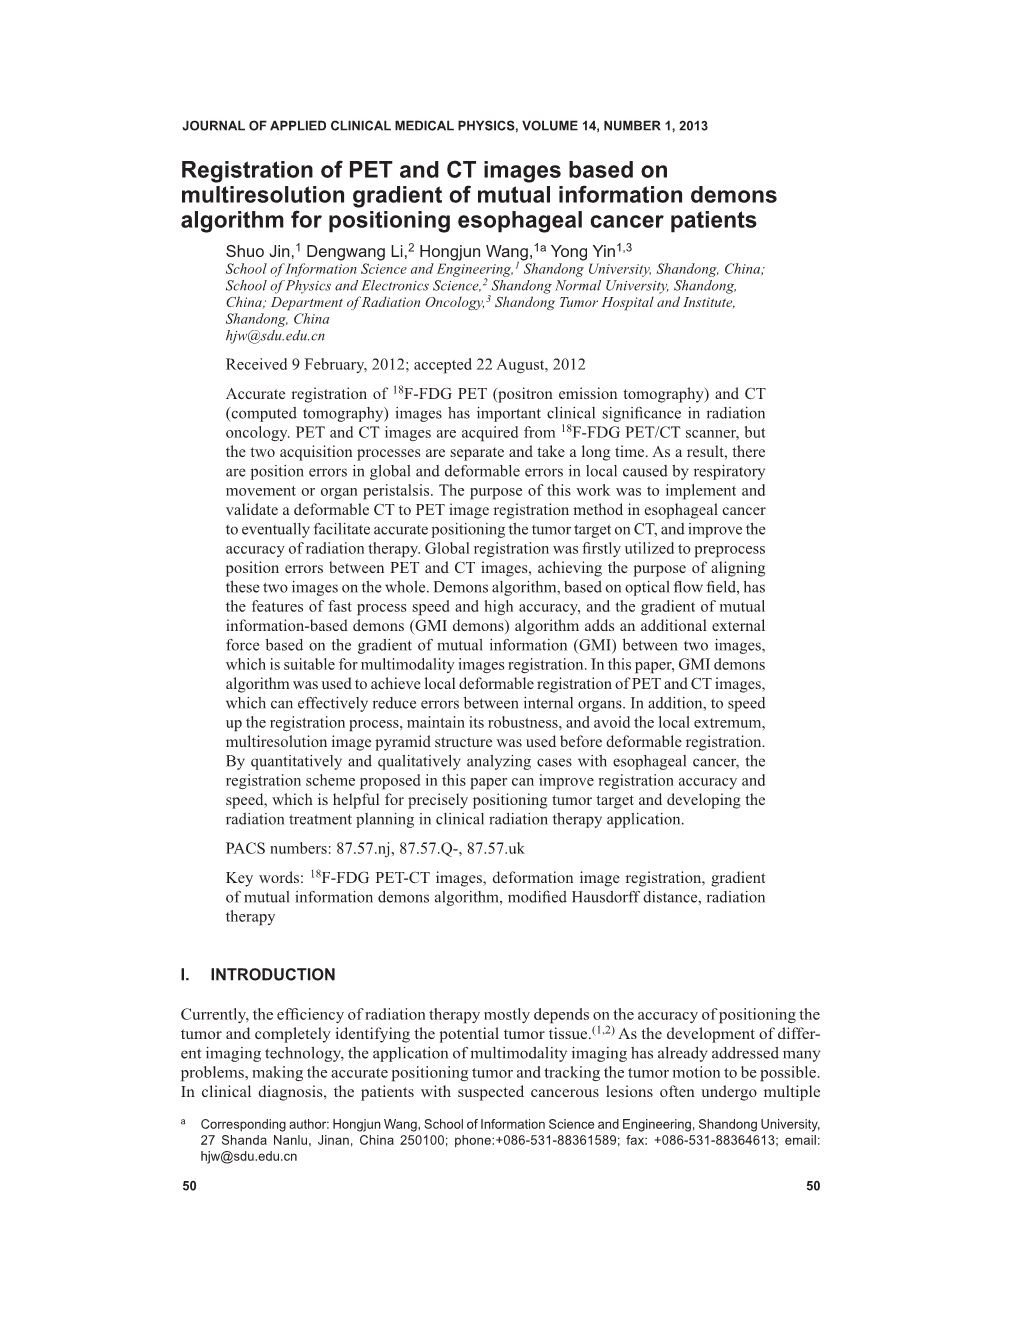 Registration of PET and CT Images Based on Multiresolution Gradient Of